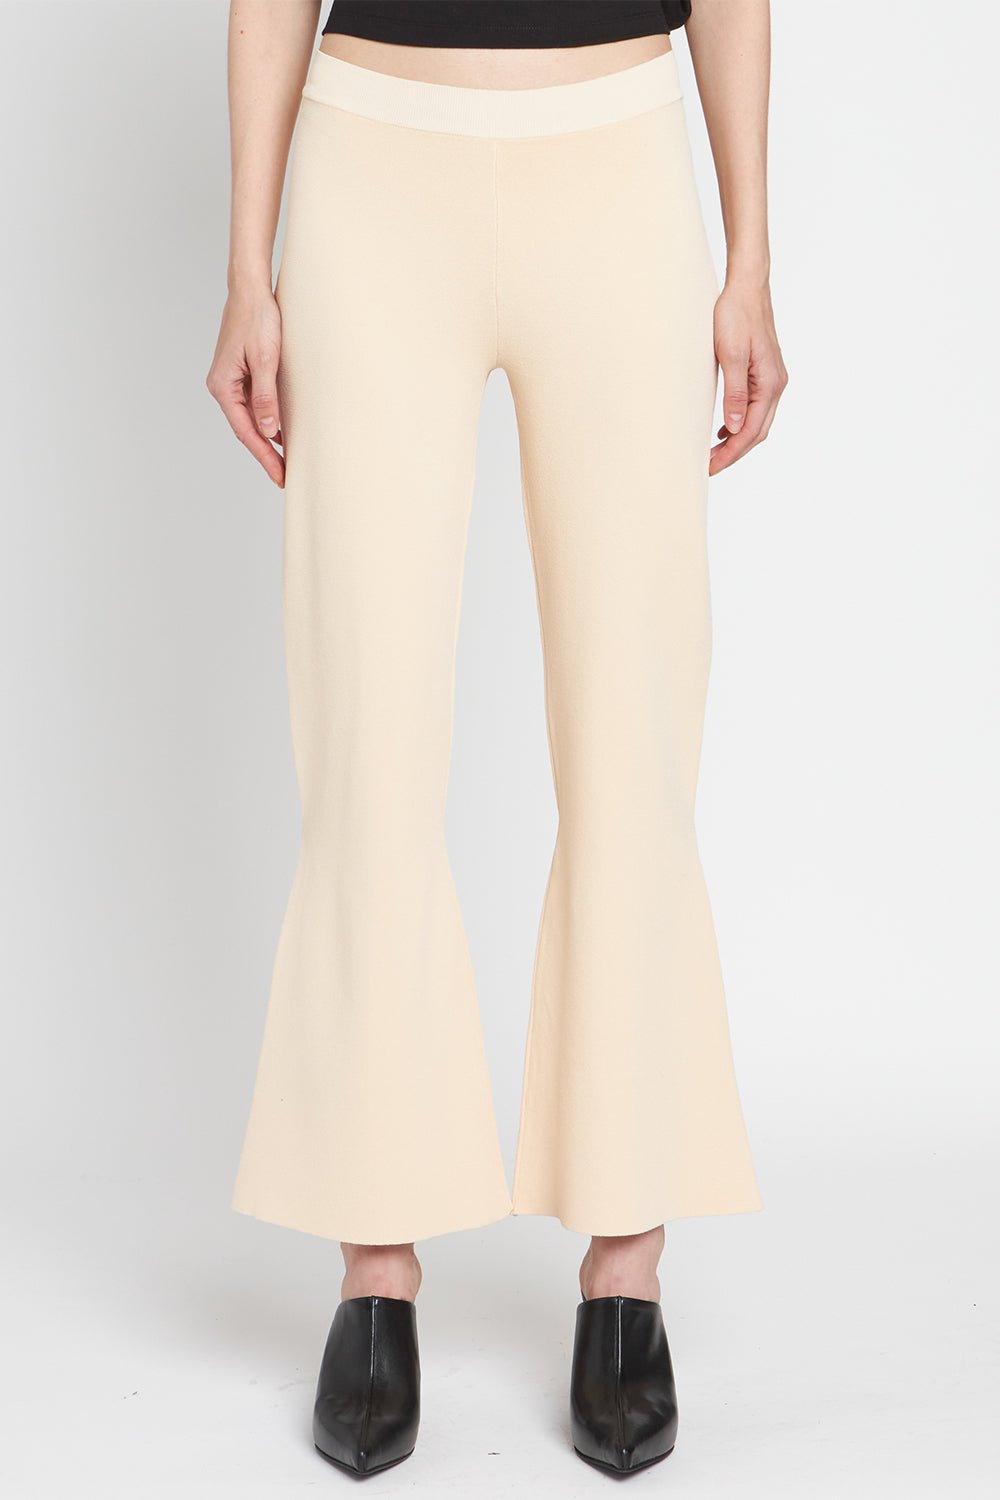 STELLA MCCARTNEY-Compact Cropped Flared Trousers-